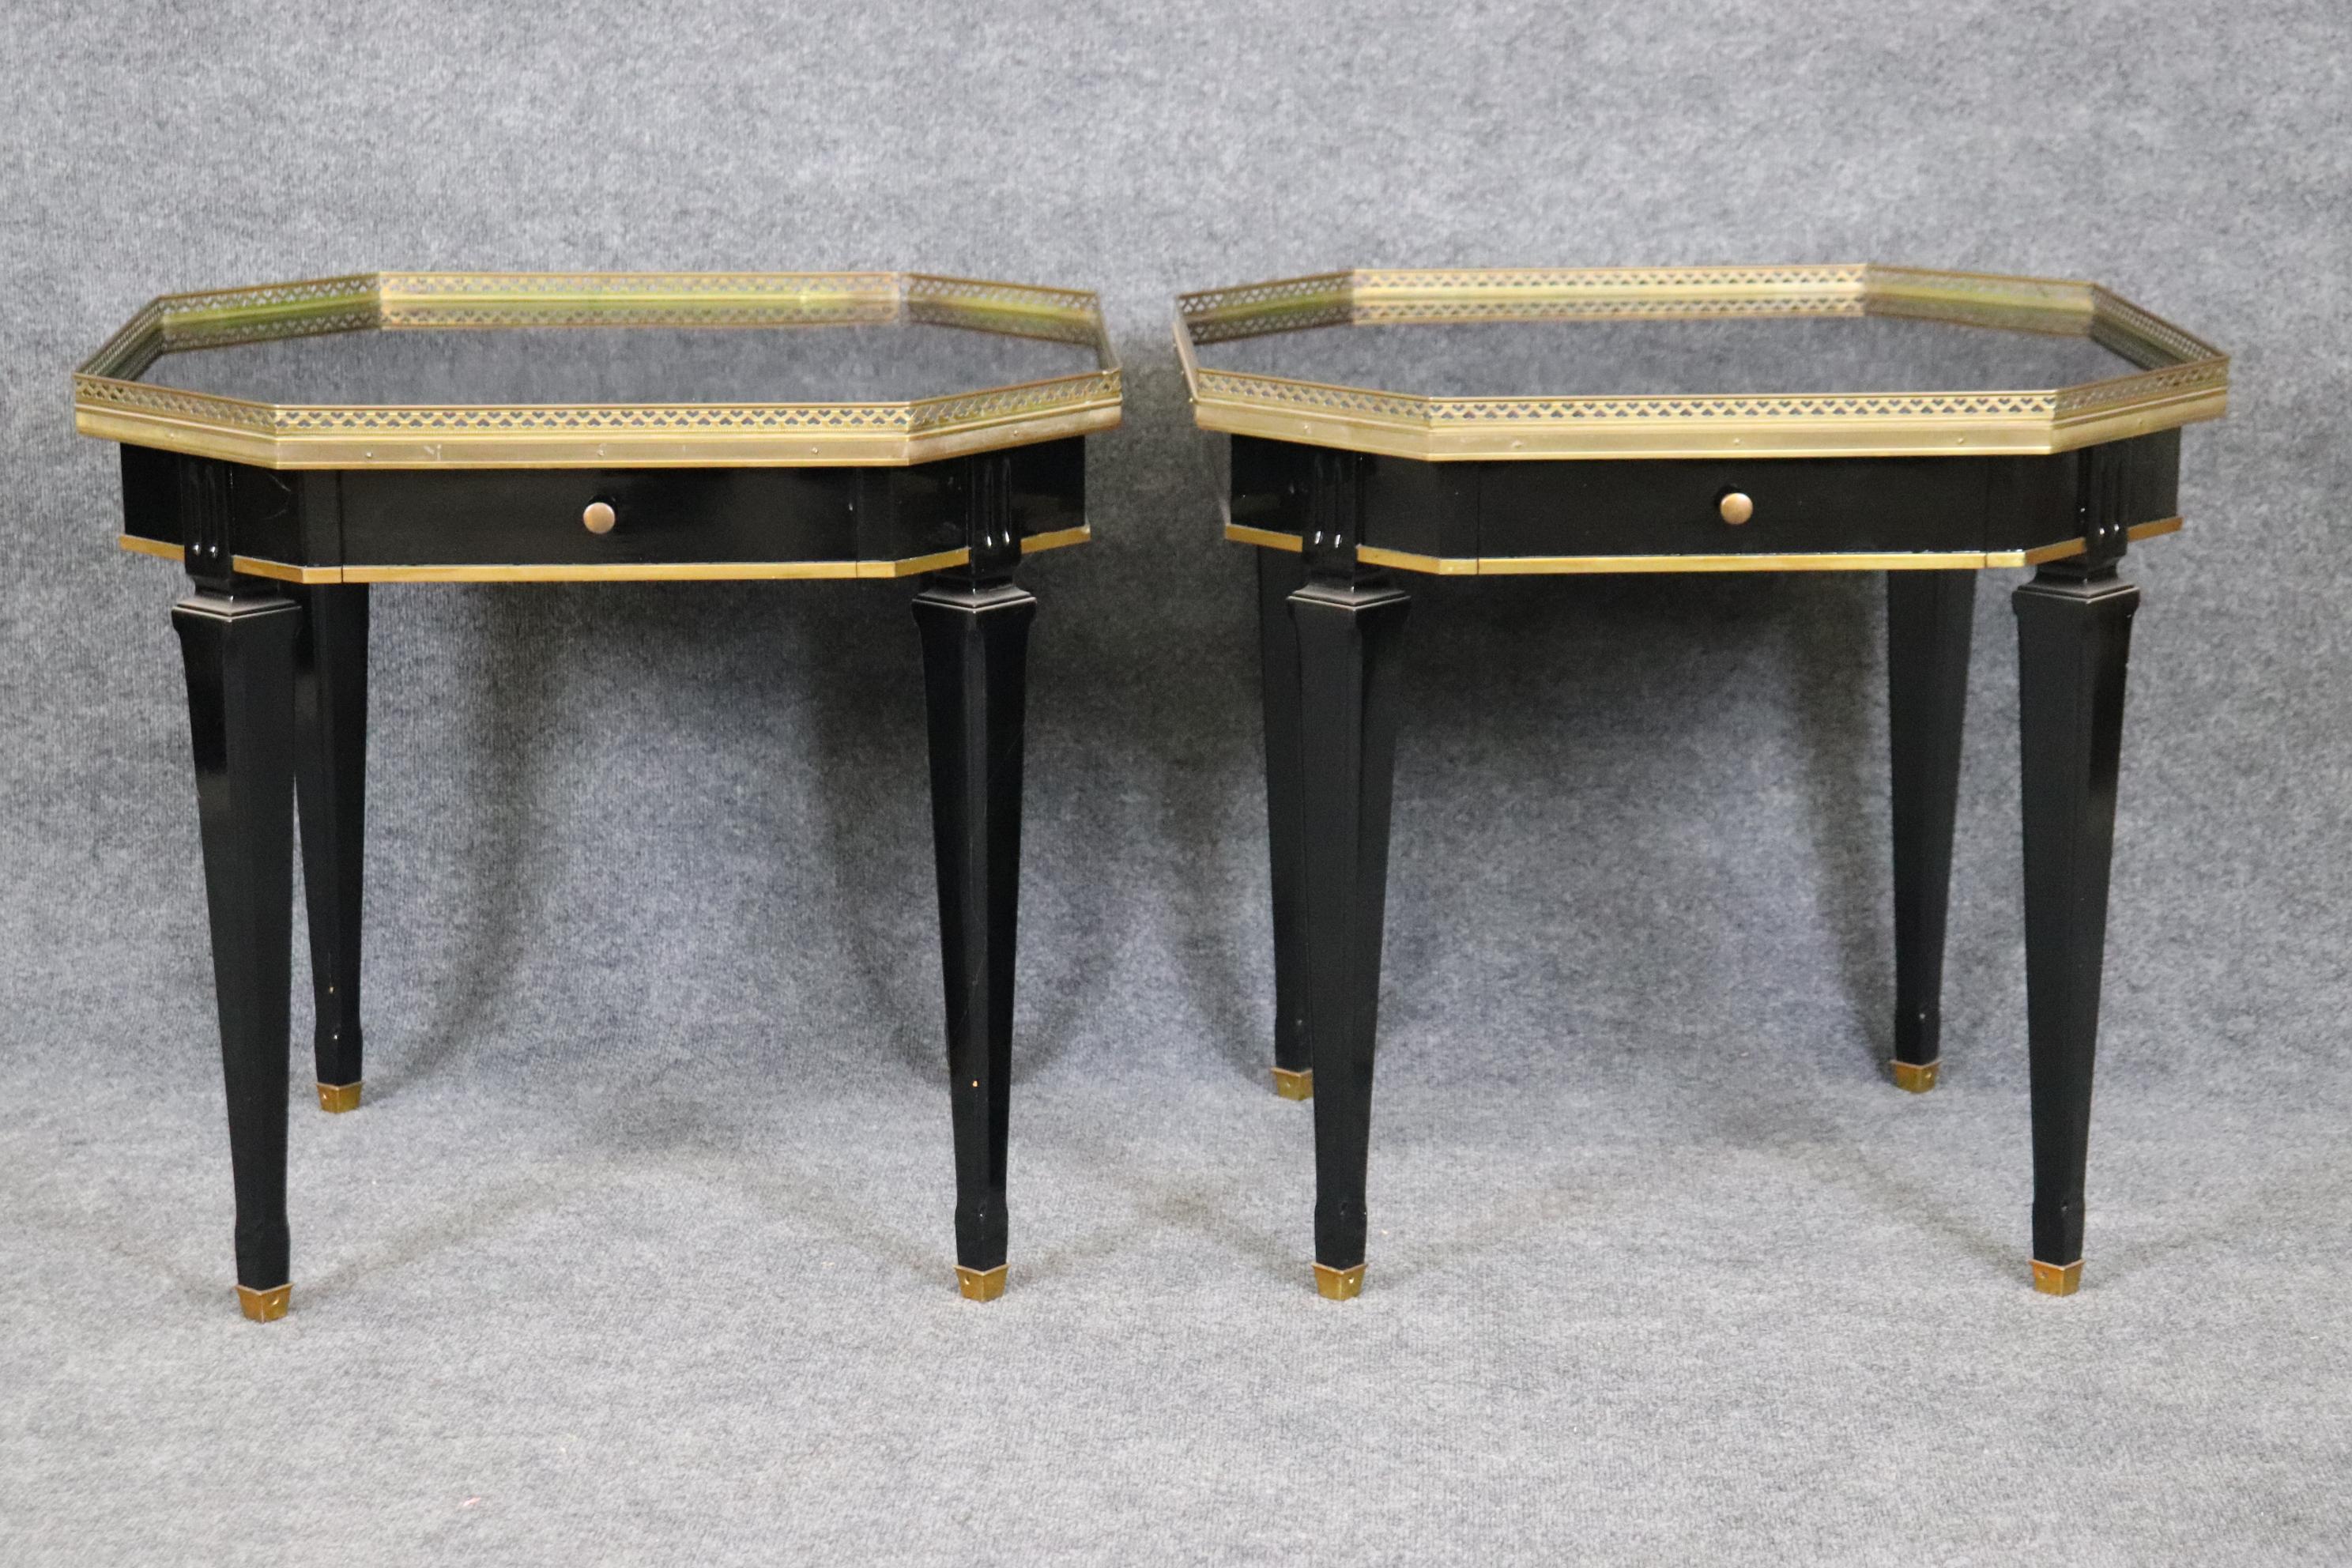 These are gorgeous recently black lacquered Maison Jansen style tables in the manner of Directoire. The tables ae in good condition and have minimal signs of age and use. The quality of the tables are impressive as is the bass and gold giltwood